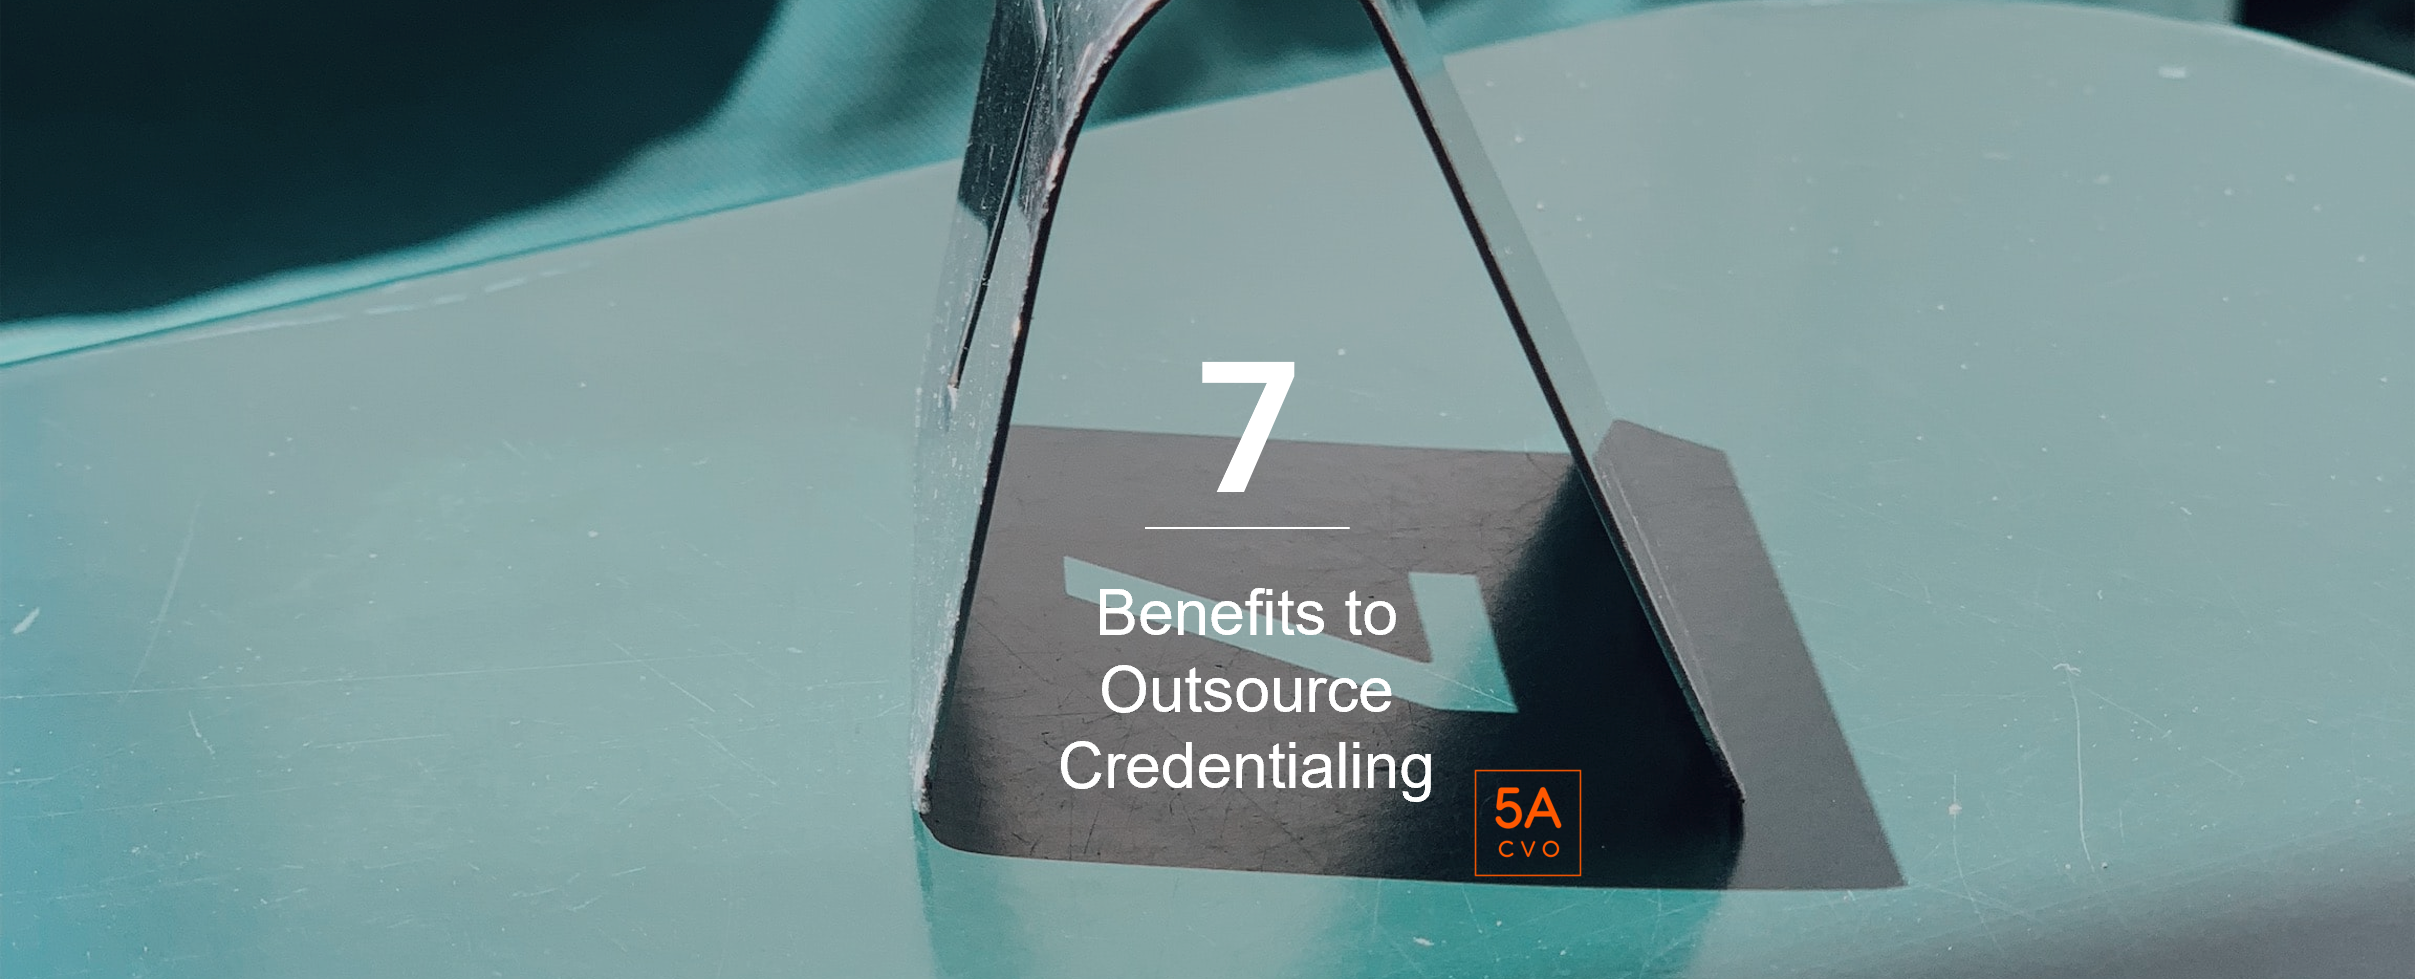 5ACVO.com 7 Benefits to Outsource Credentialing Services 2022